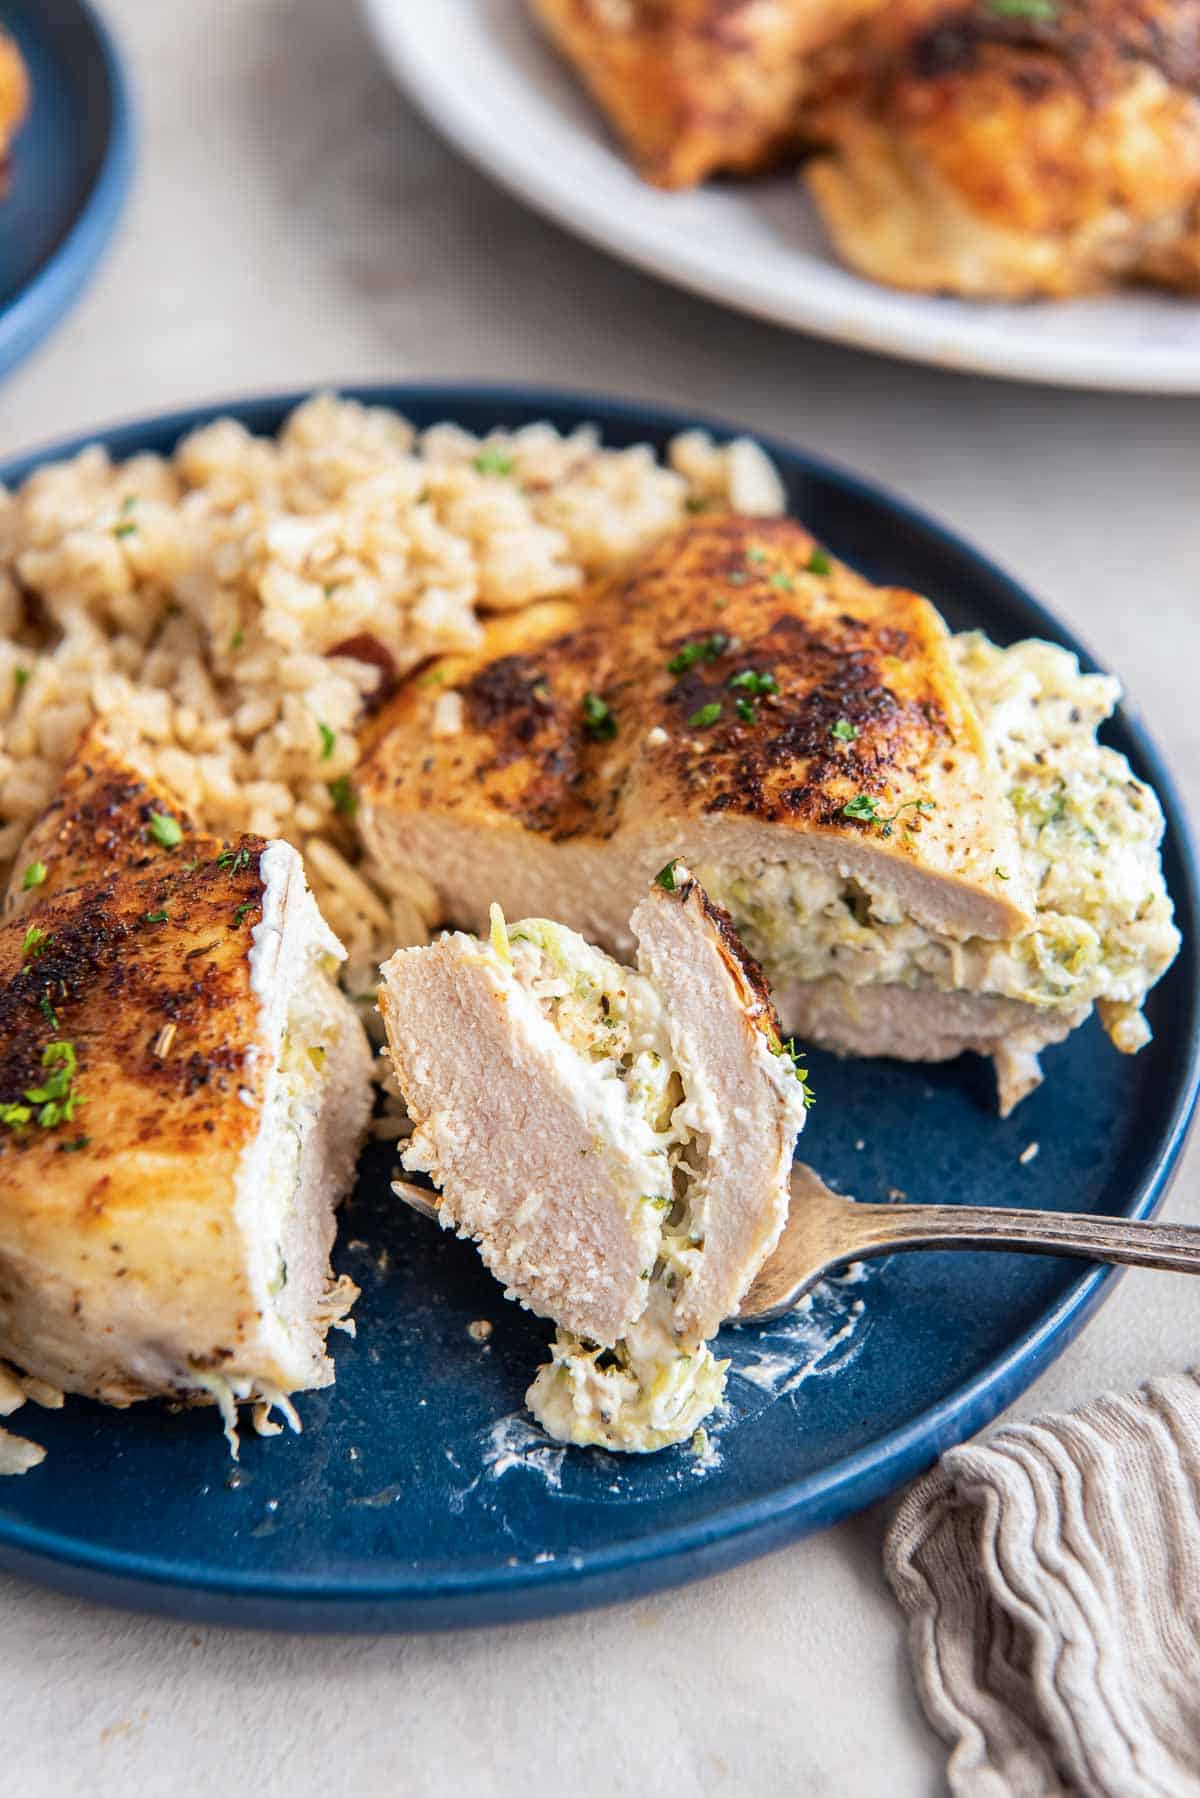 A piece of stuffed chicken cut in half on a blue plate with a fork.